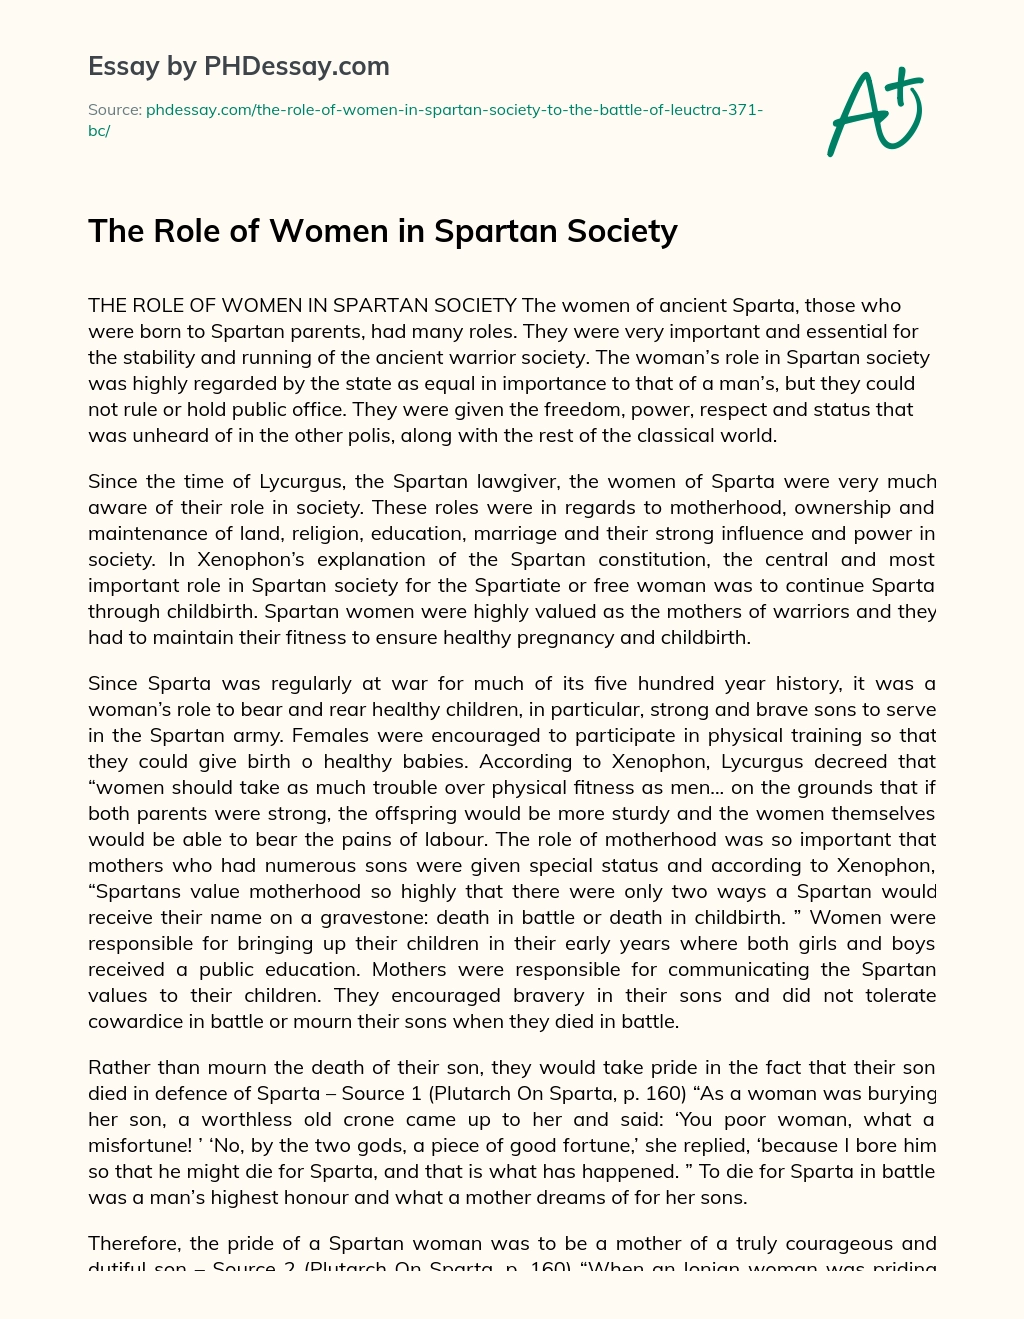 The Role of Women in Spartan Society essay